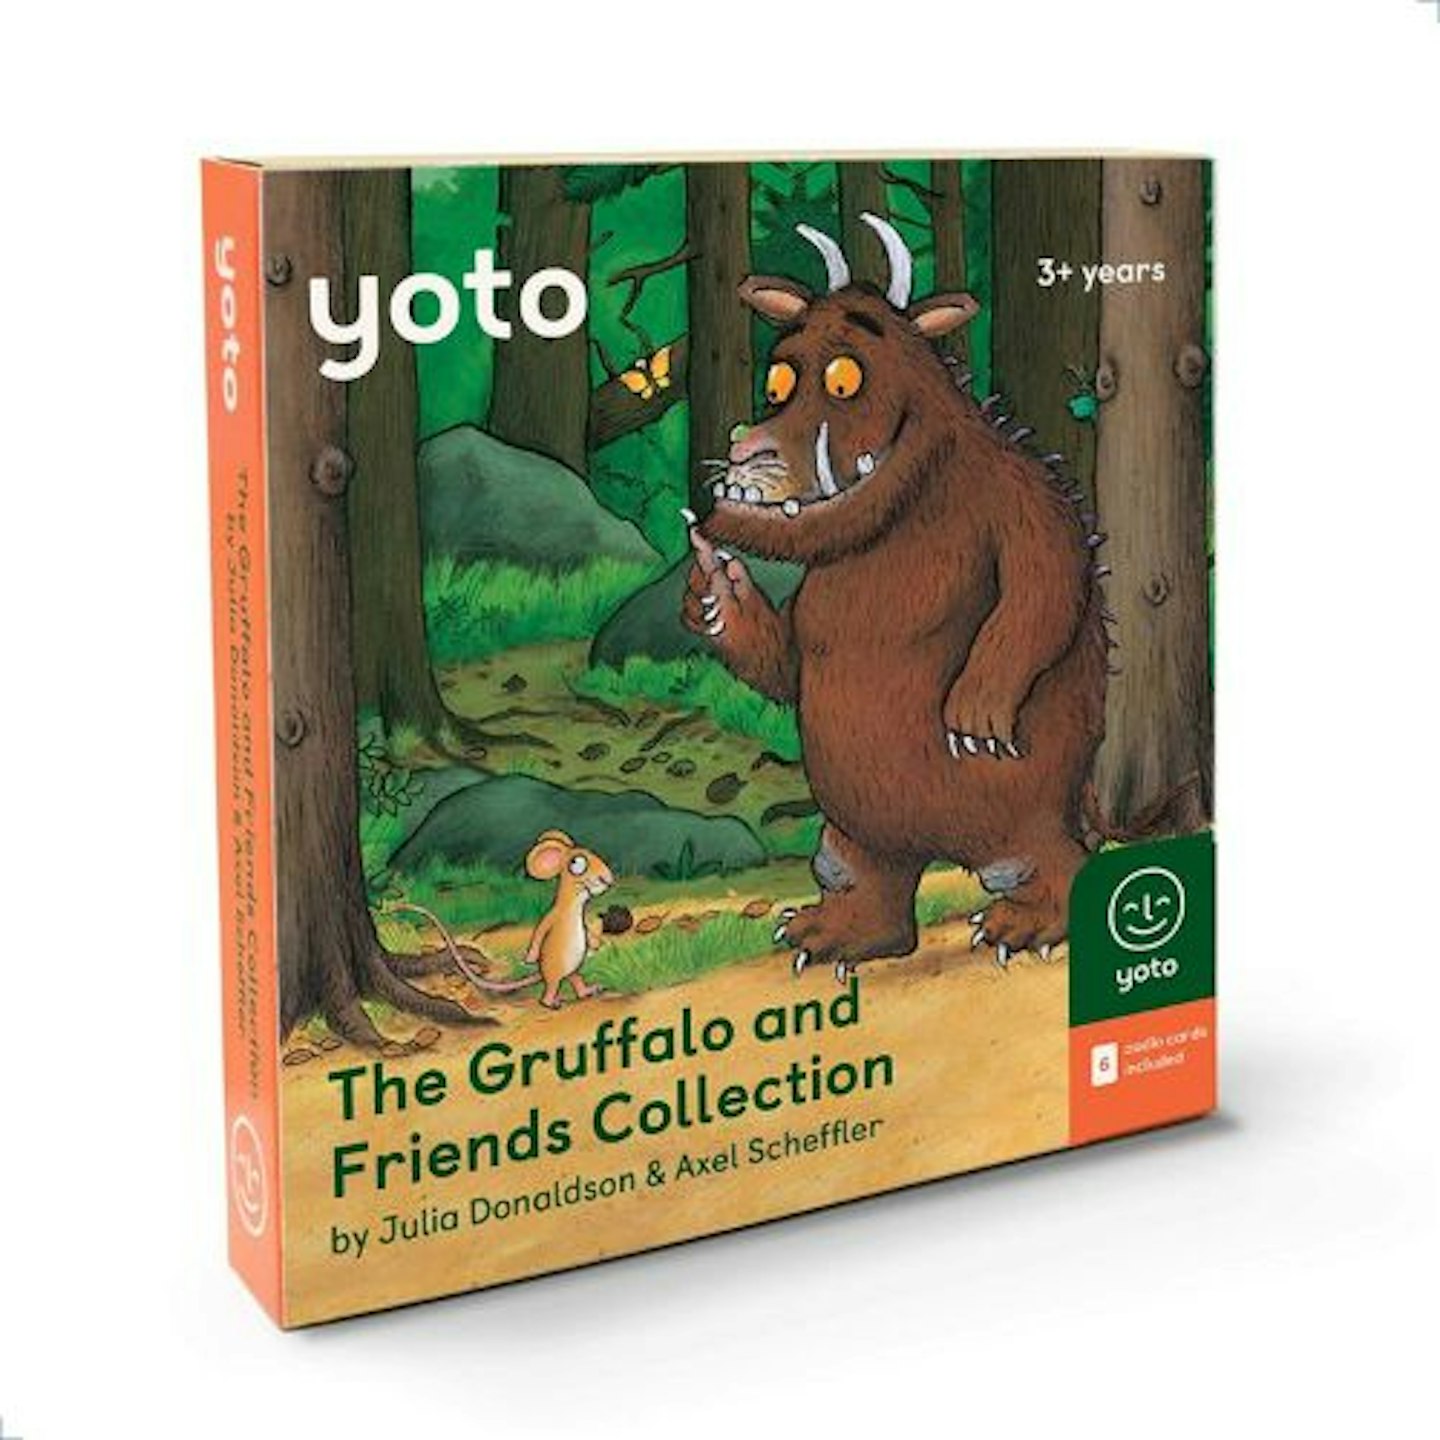 Best Yoto Player story cards Yoto Player Gruffalo and Friends Collection by Julia Donaldson